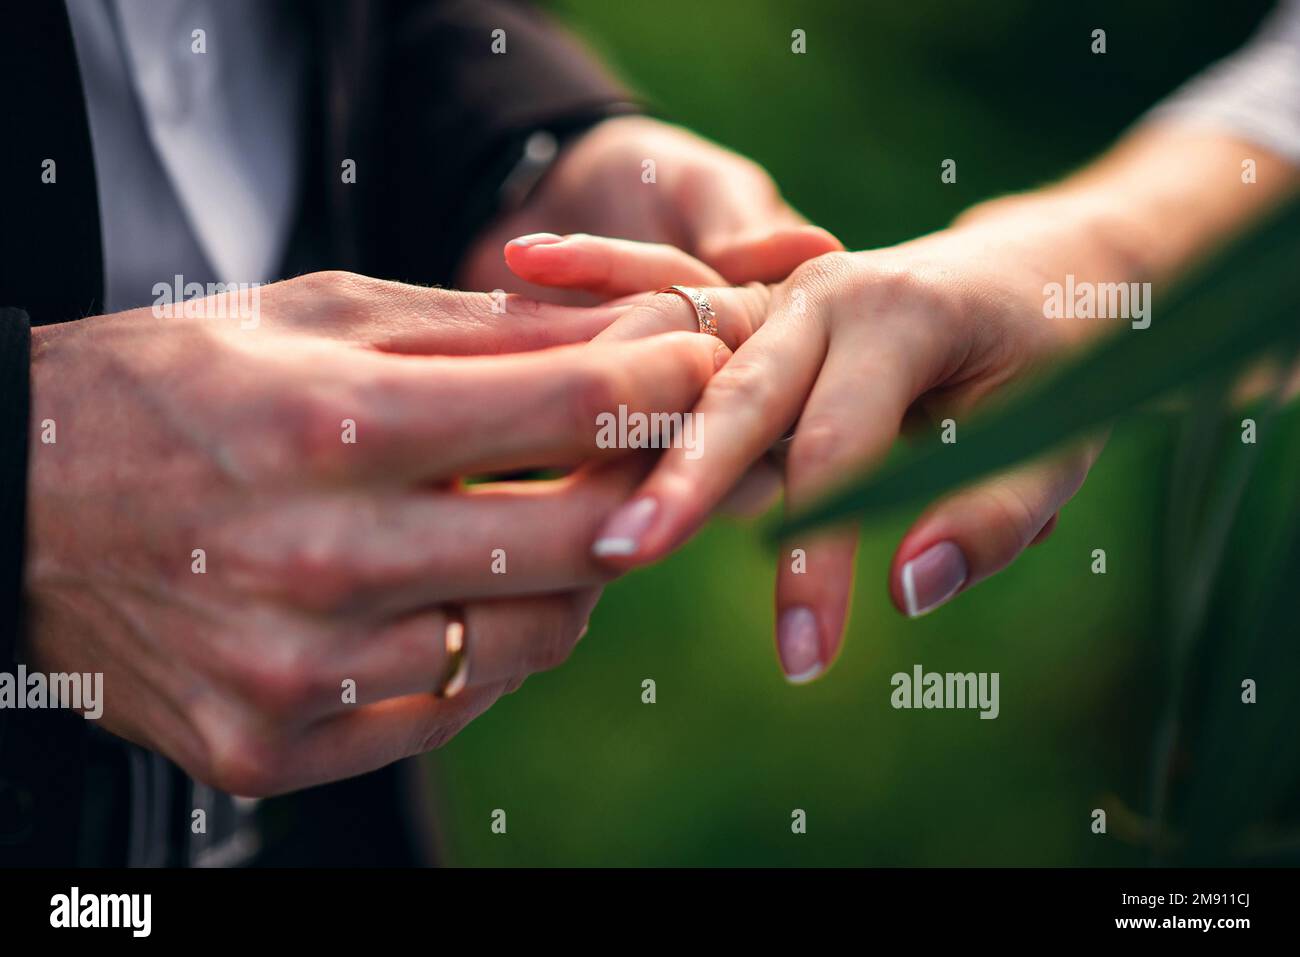 exchange rings for wedding registration of marriage between the bride and groom. Hands close up Stock Photo